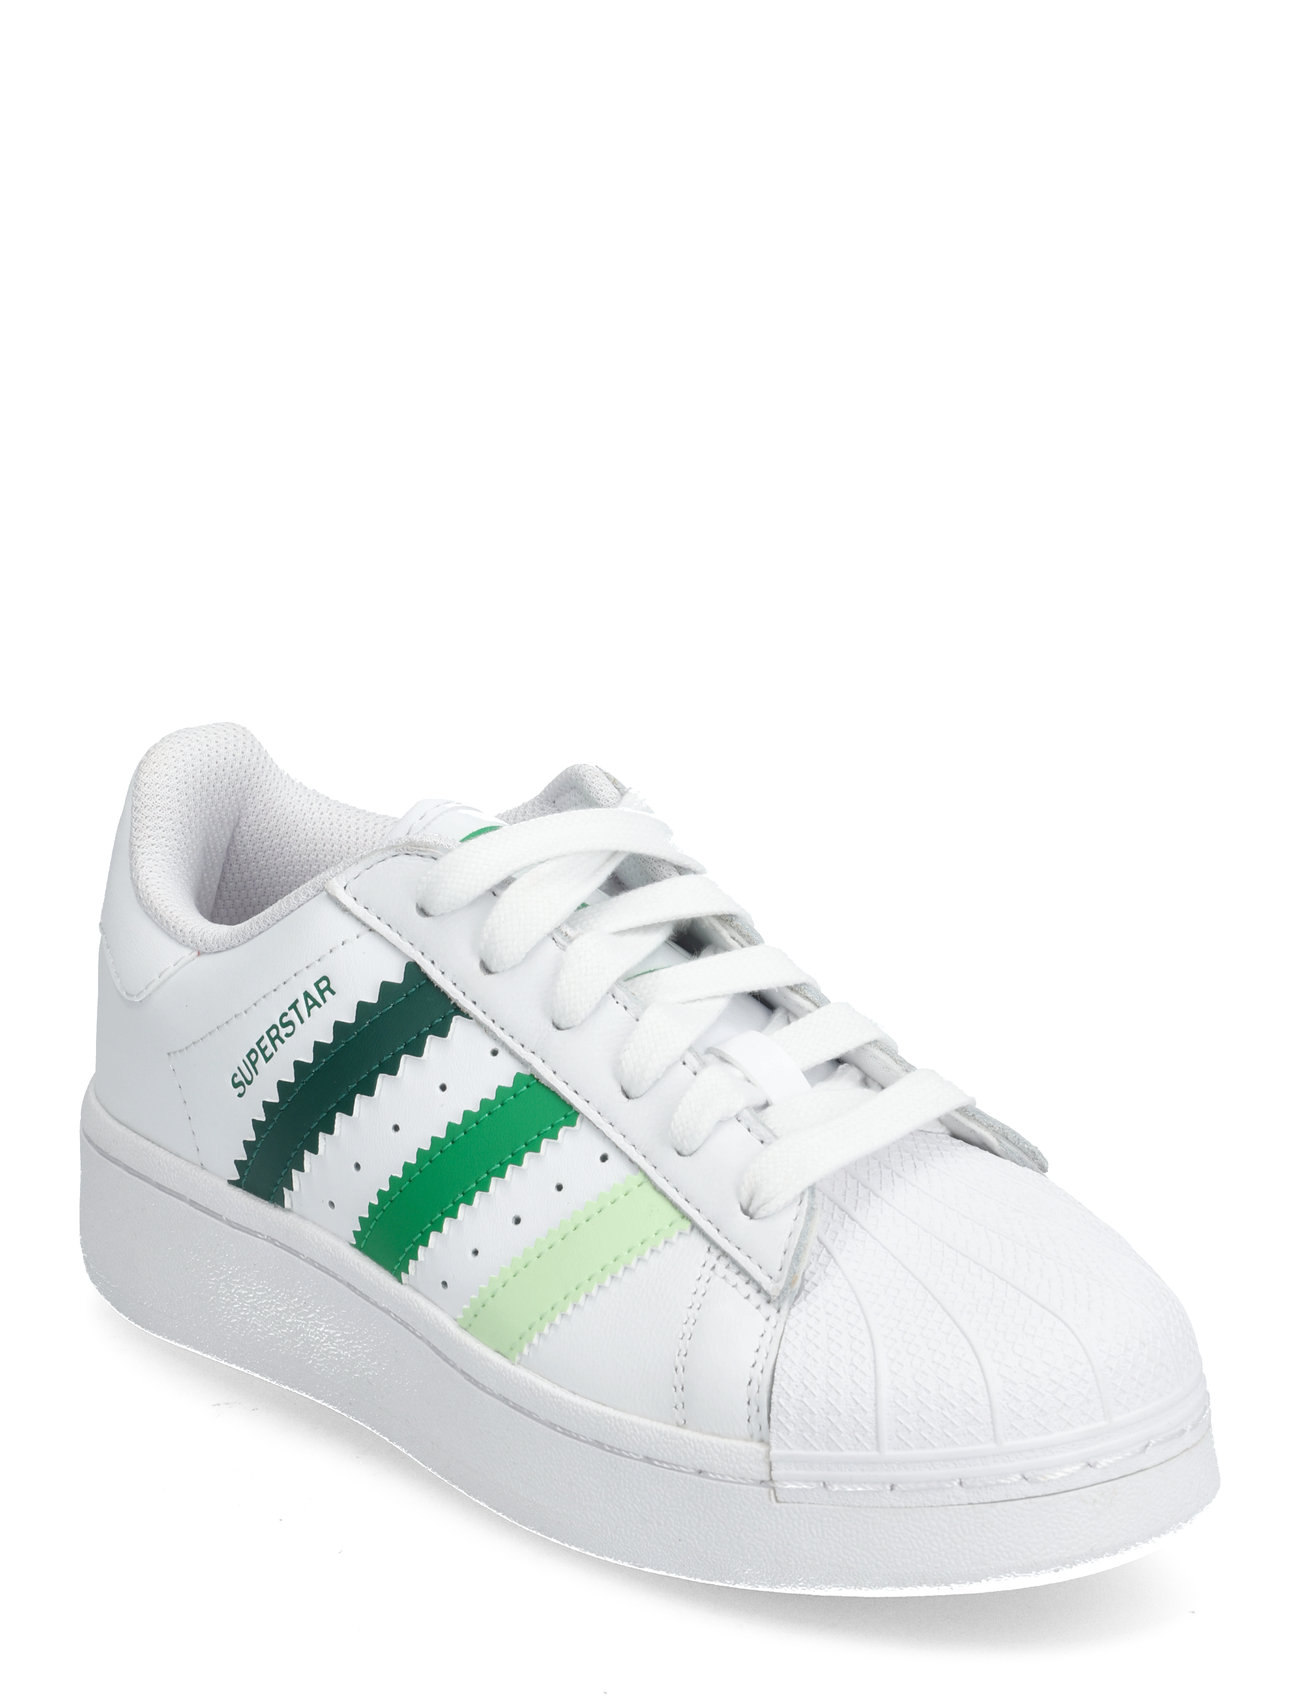 Superstar Xlg W Sport Sneakers Low-top Sneakers White Adidas Originals